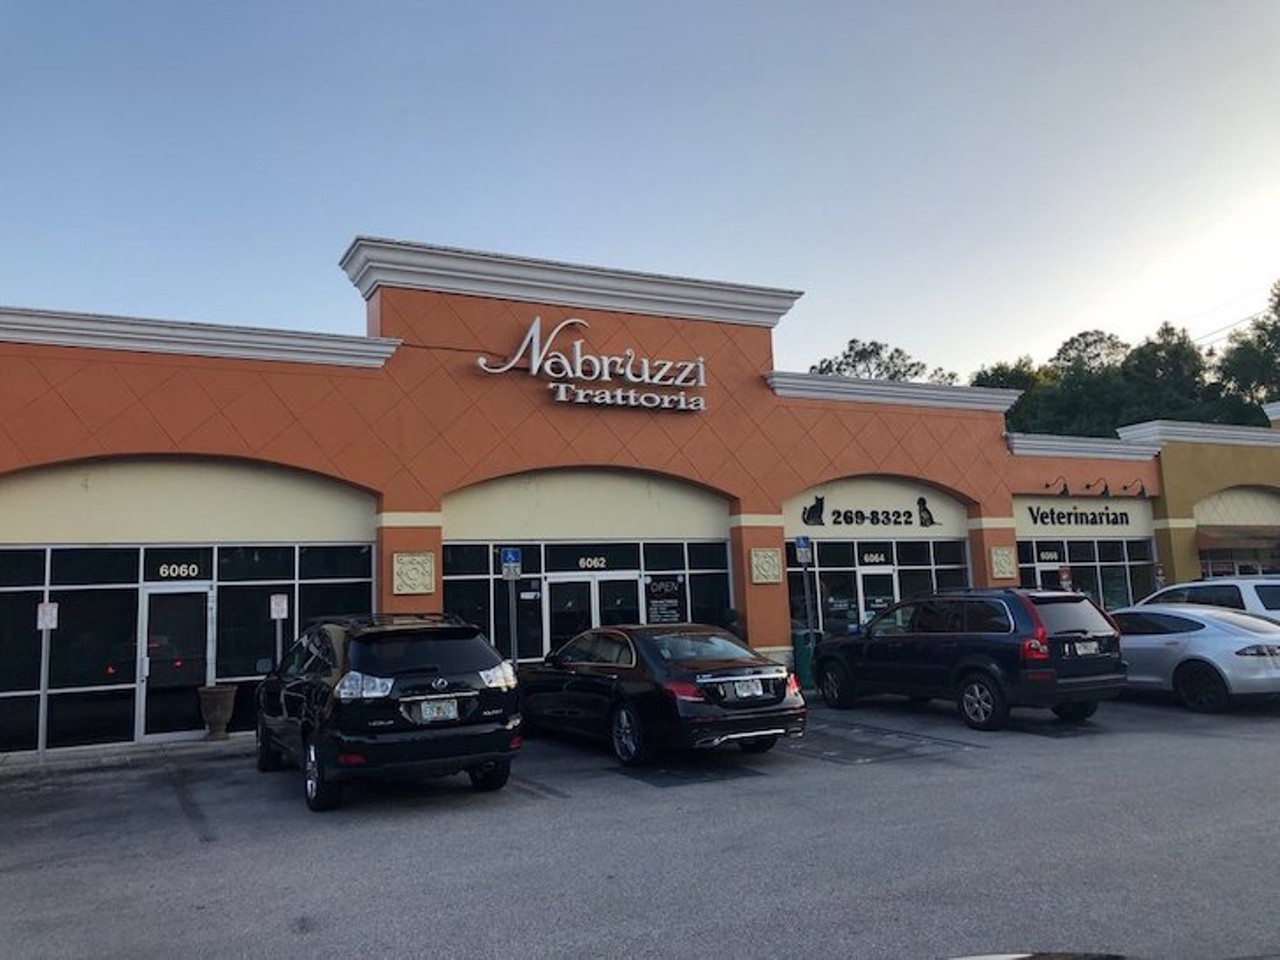 17. Nabruzzi Trattoria
6062 Van Dyke Rd., Lutz, (813) 304-2583
&#147;Very surprised I have not tried this gem earlier! Great atmosphere, staff was friendly and the food was to die for.&#148; -Lara T. 
Photo via John I./Yelp